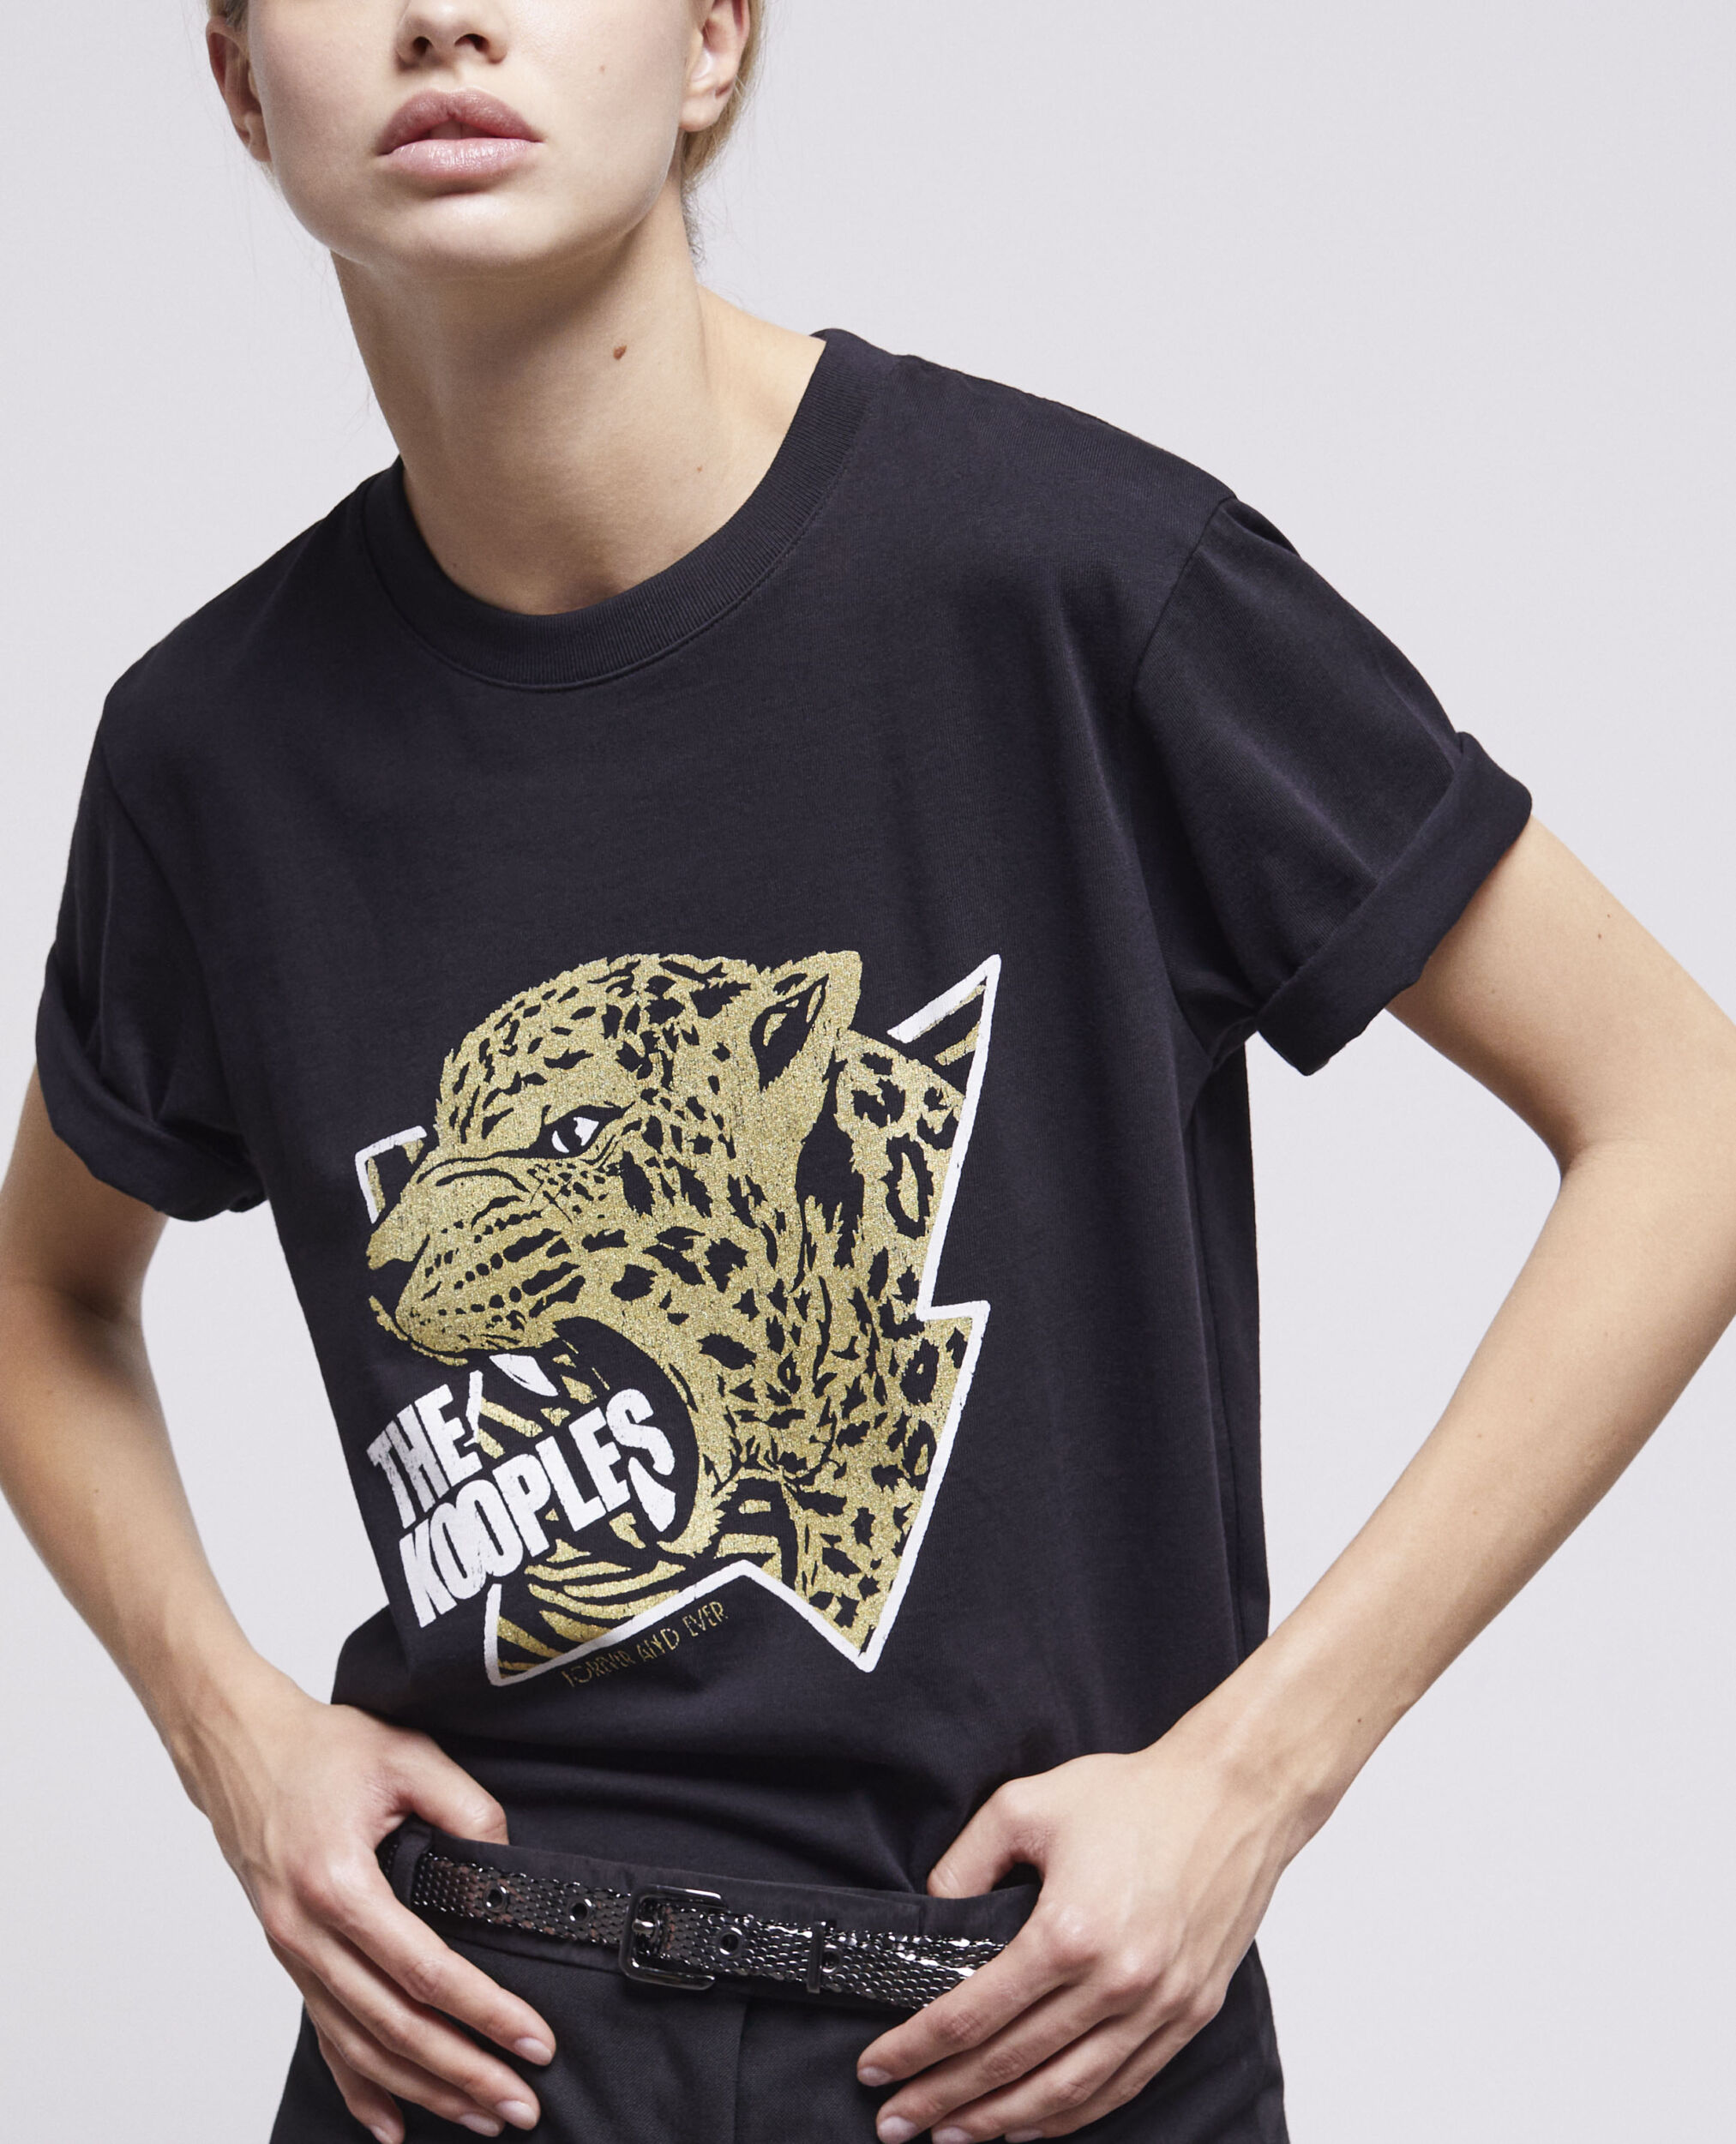 Women's t-shirt with a tiger screen print, BLACK-ANTIC GOLD, hi-res image number null